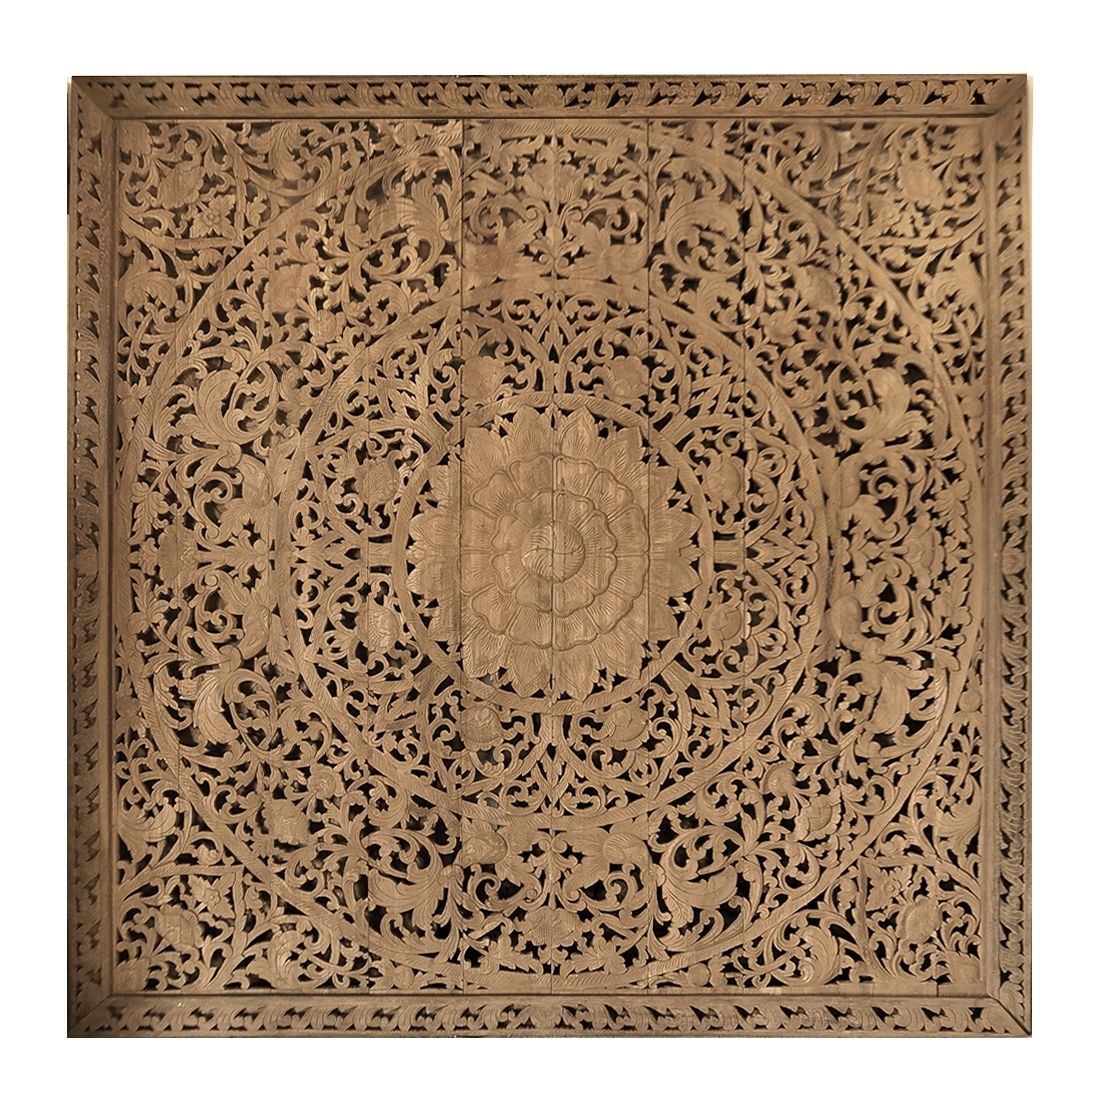 Buy Large Grand Carved Wooden Wall Art Or Ceiling Panel Online Regarding Wood Wall Art (Photo 20 of 20)